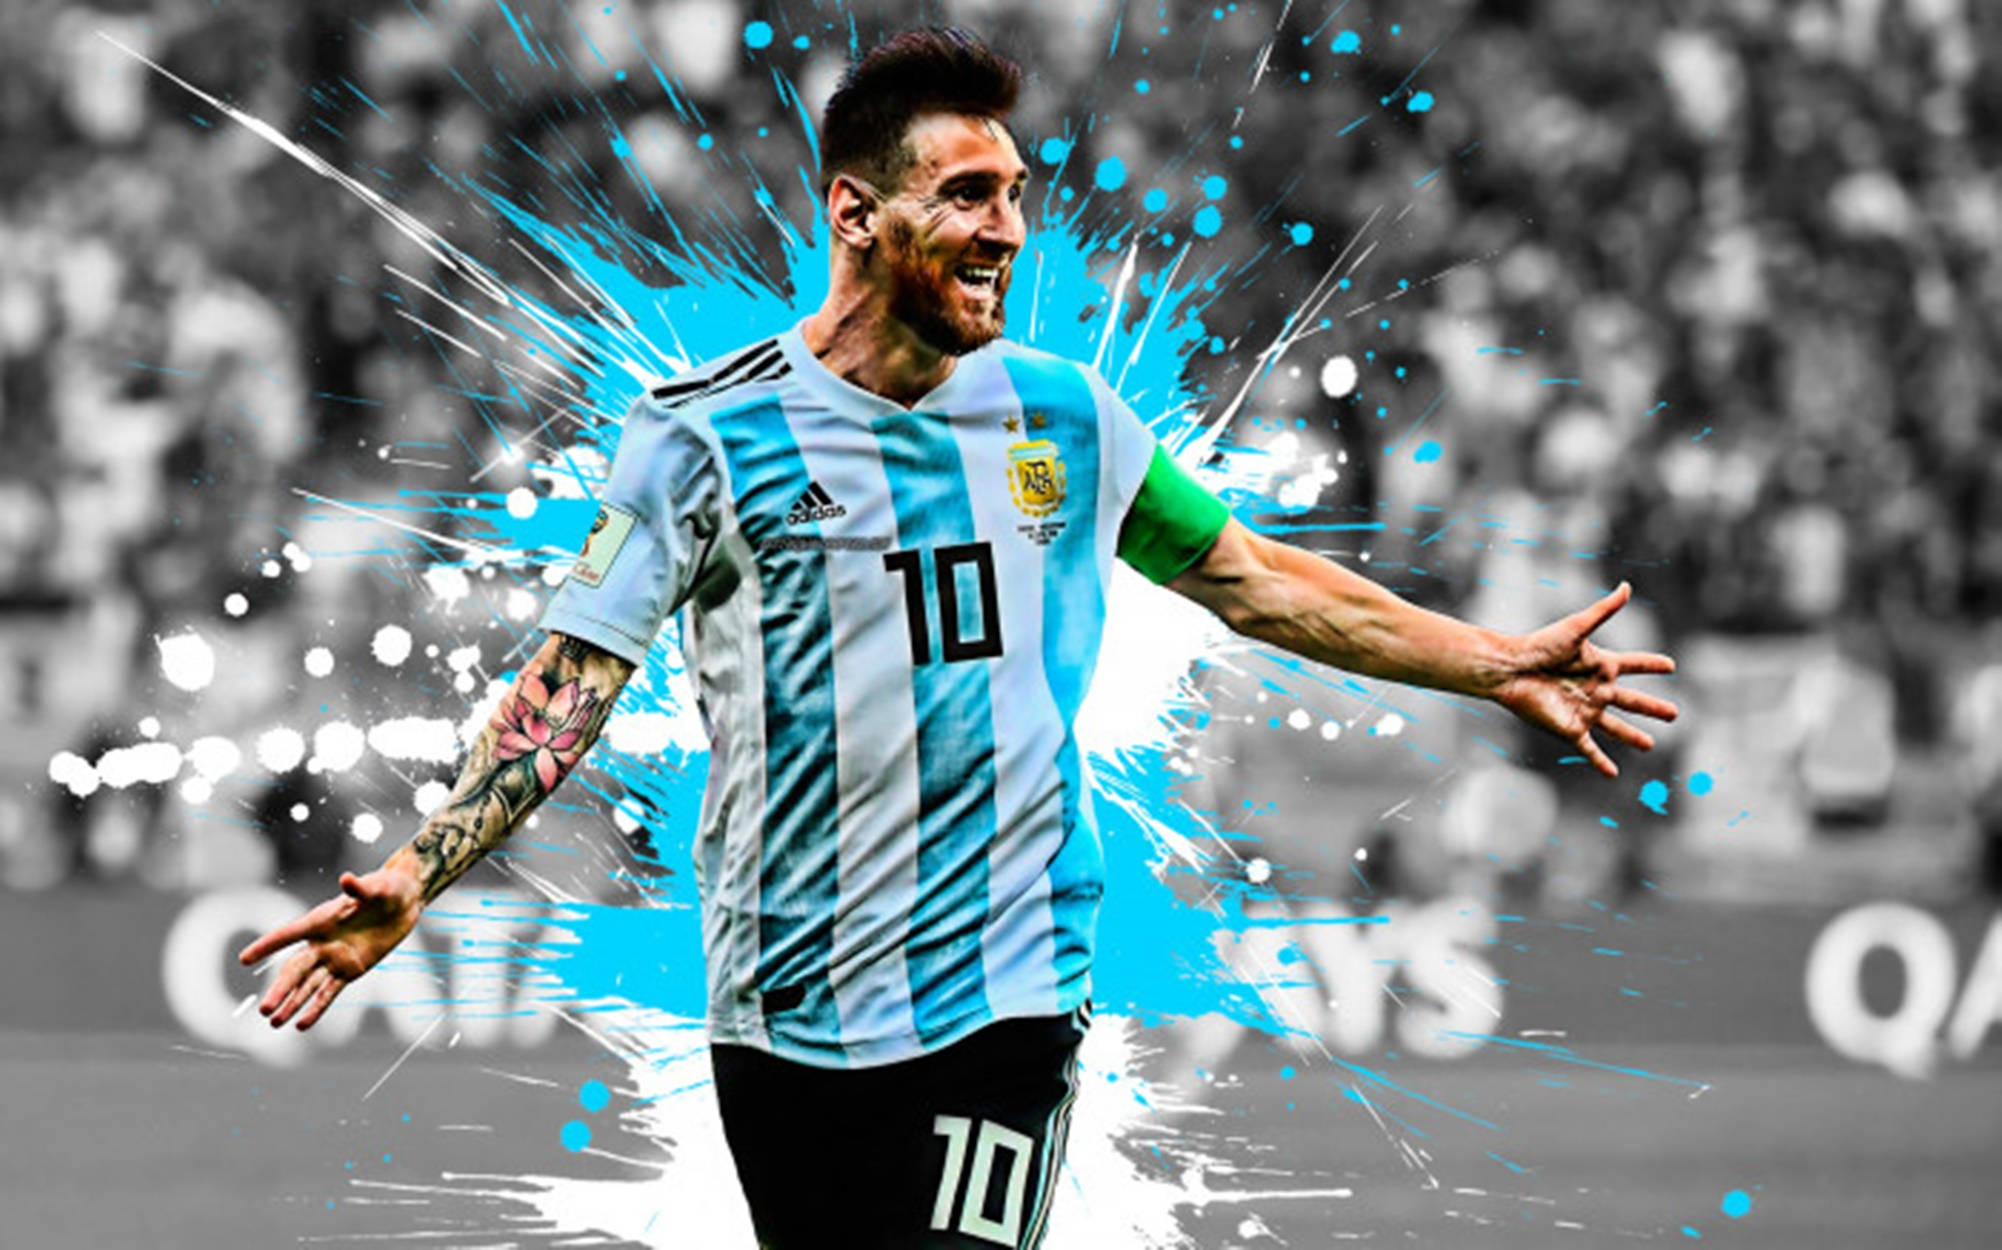 Download Messi Argentina Blue And White Splash Wallpaper | Wallpapers.com